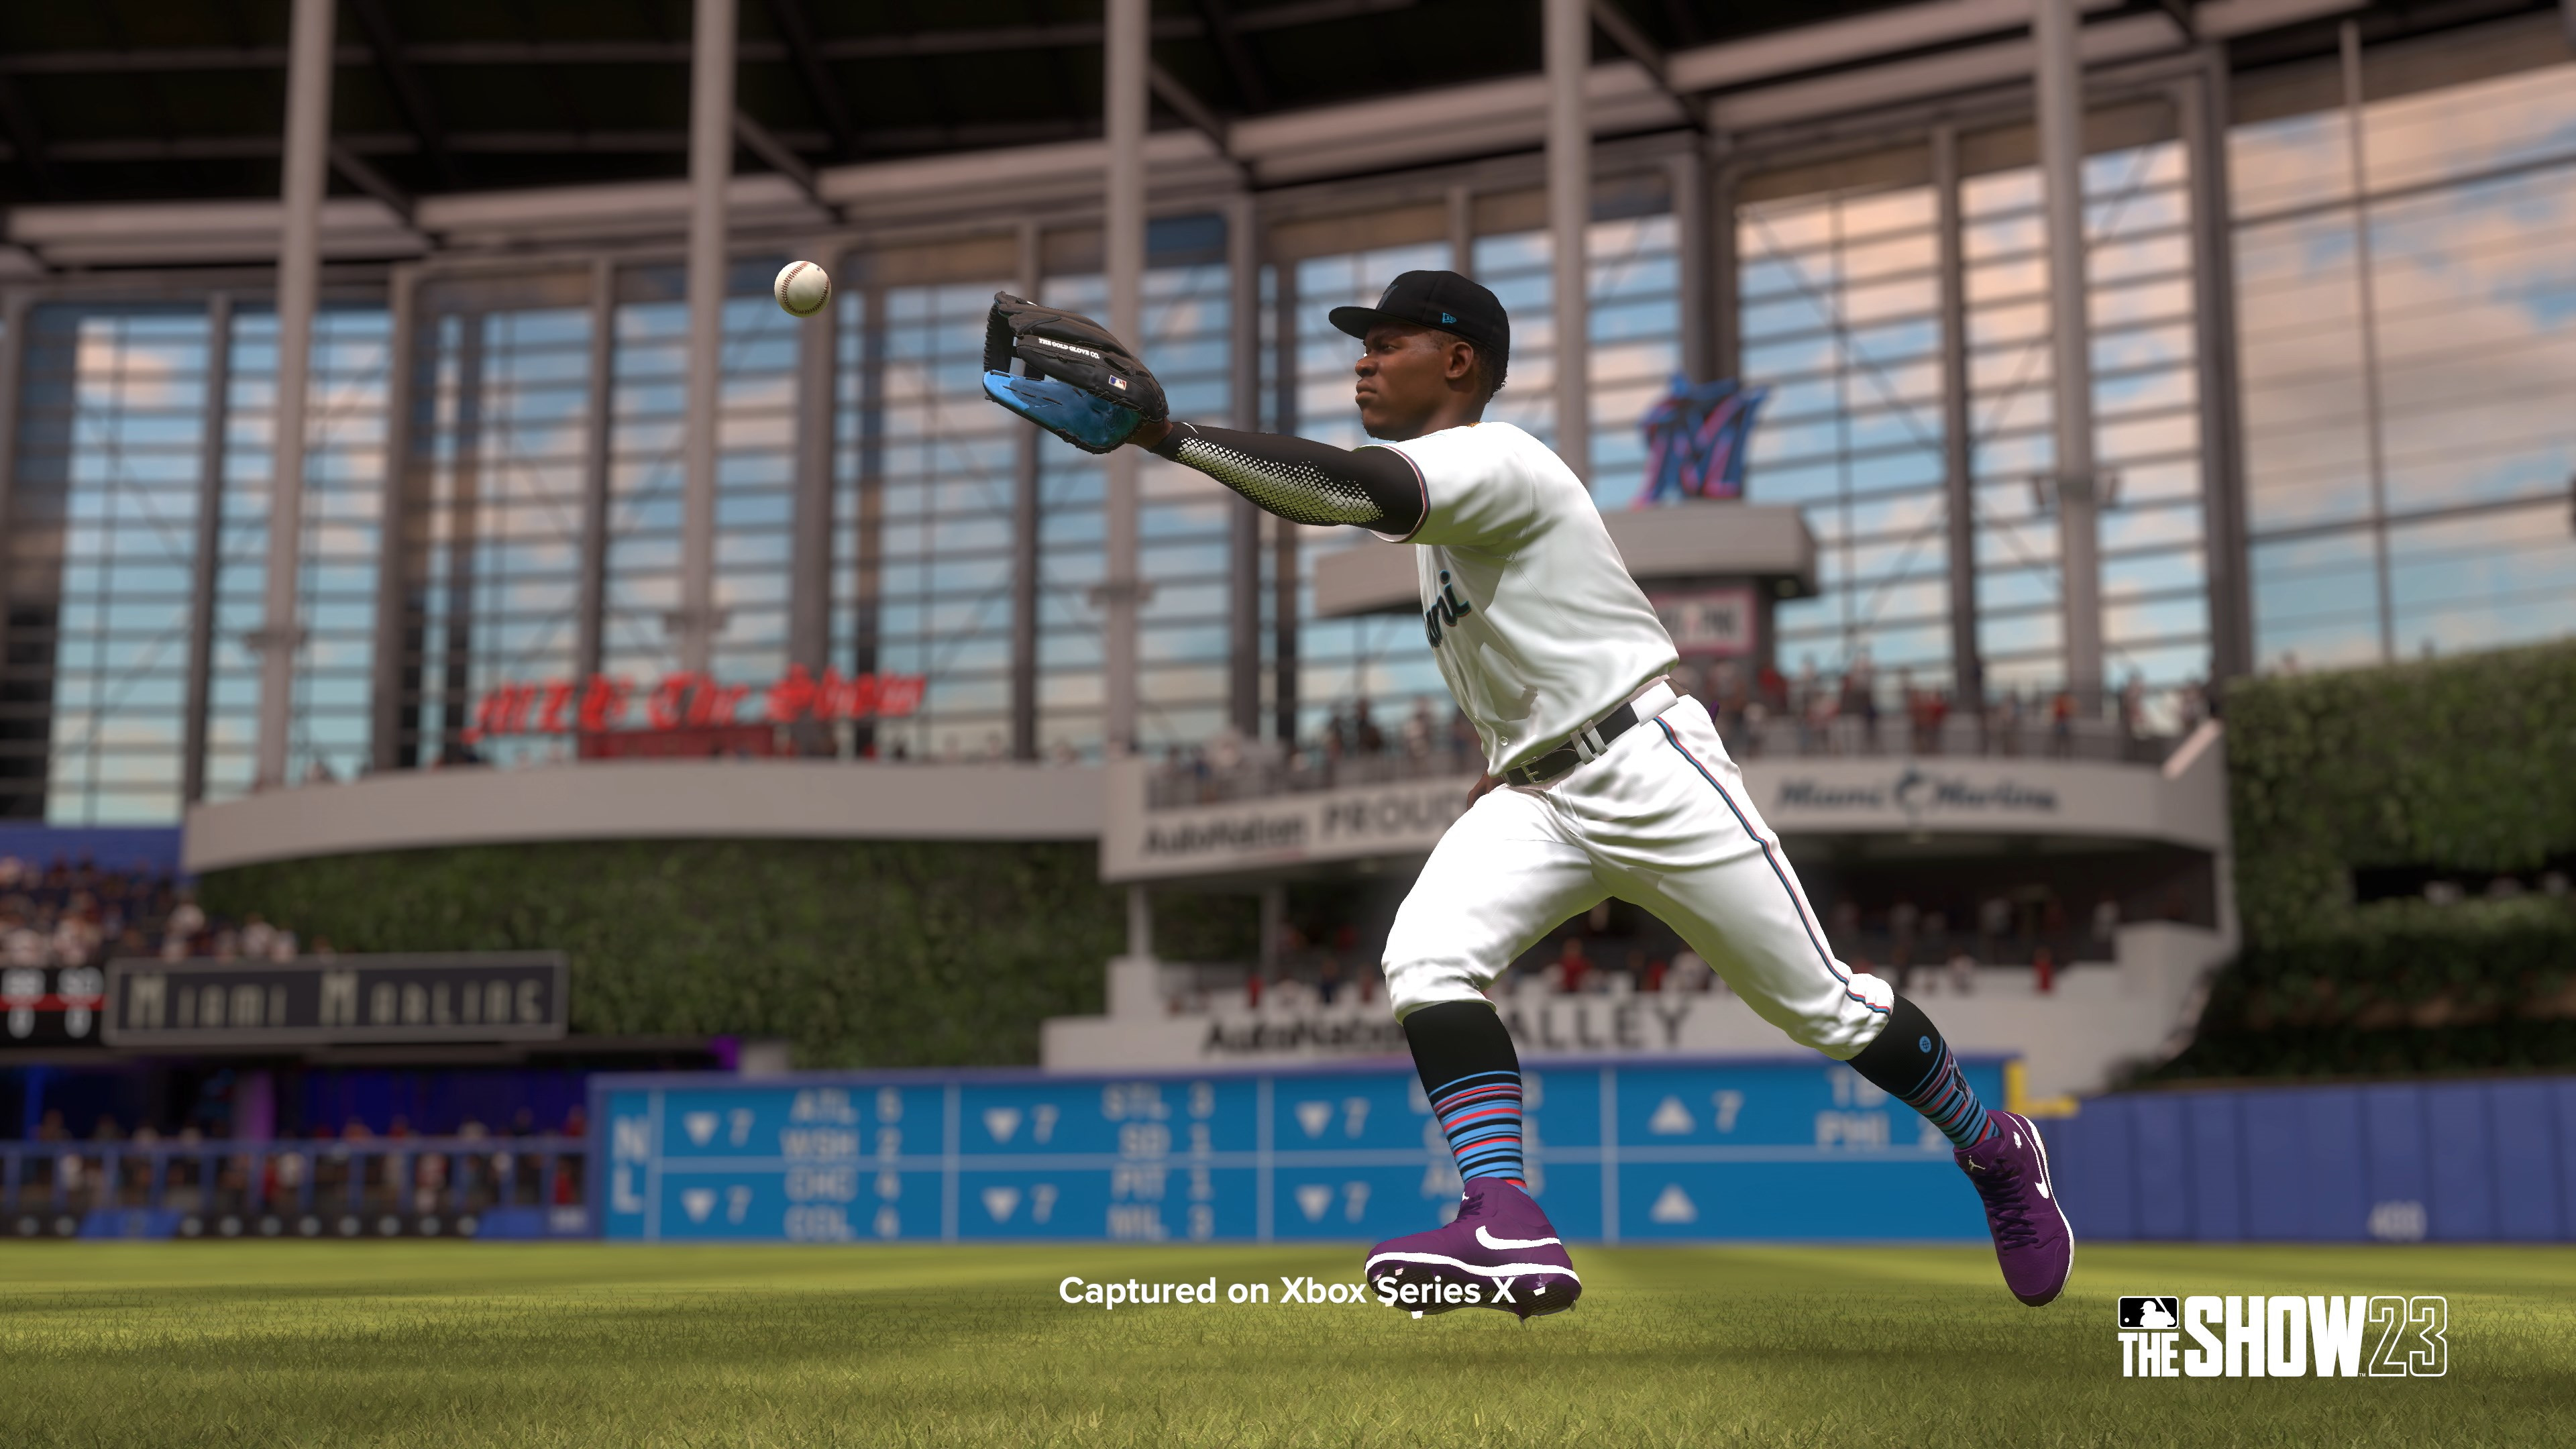 MLB The Show 23 PlayStation 4 Account Pixelpuffin.net Activation Link